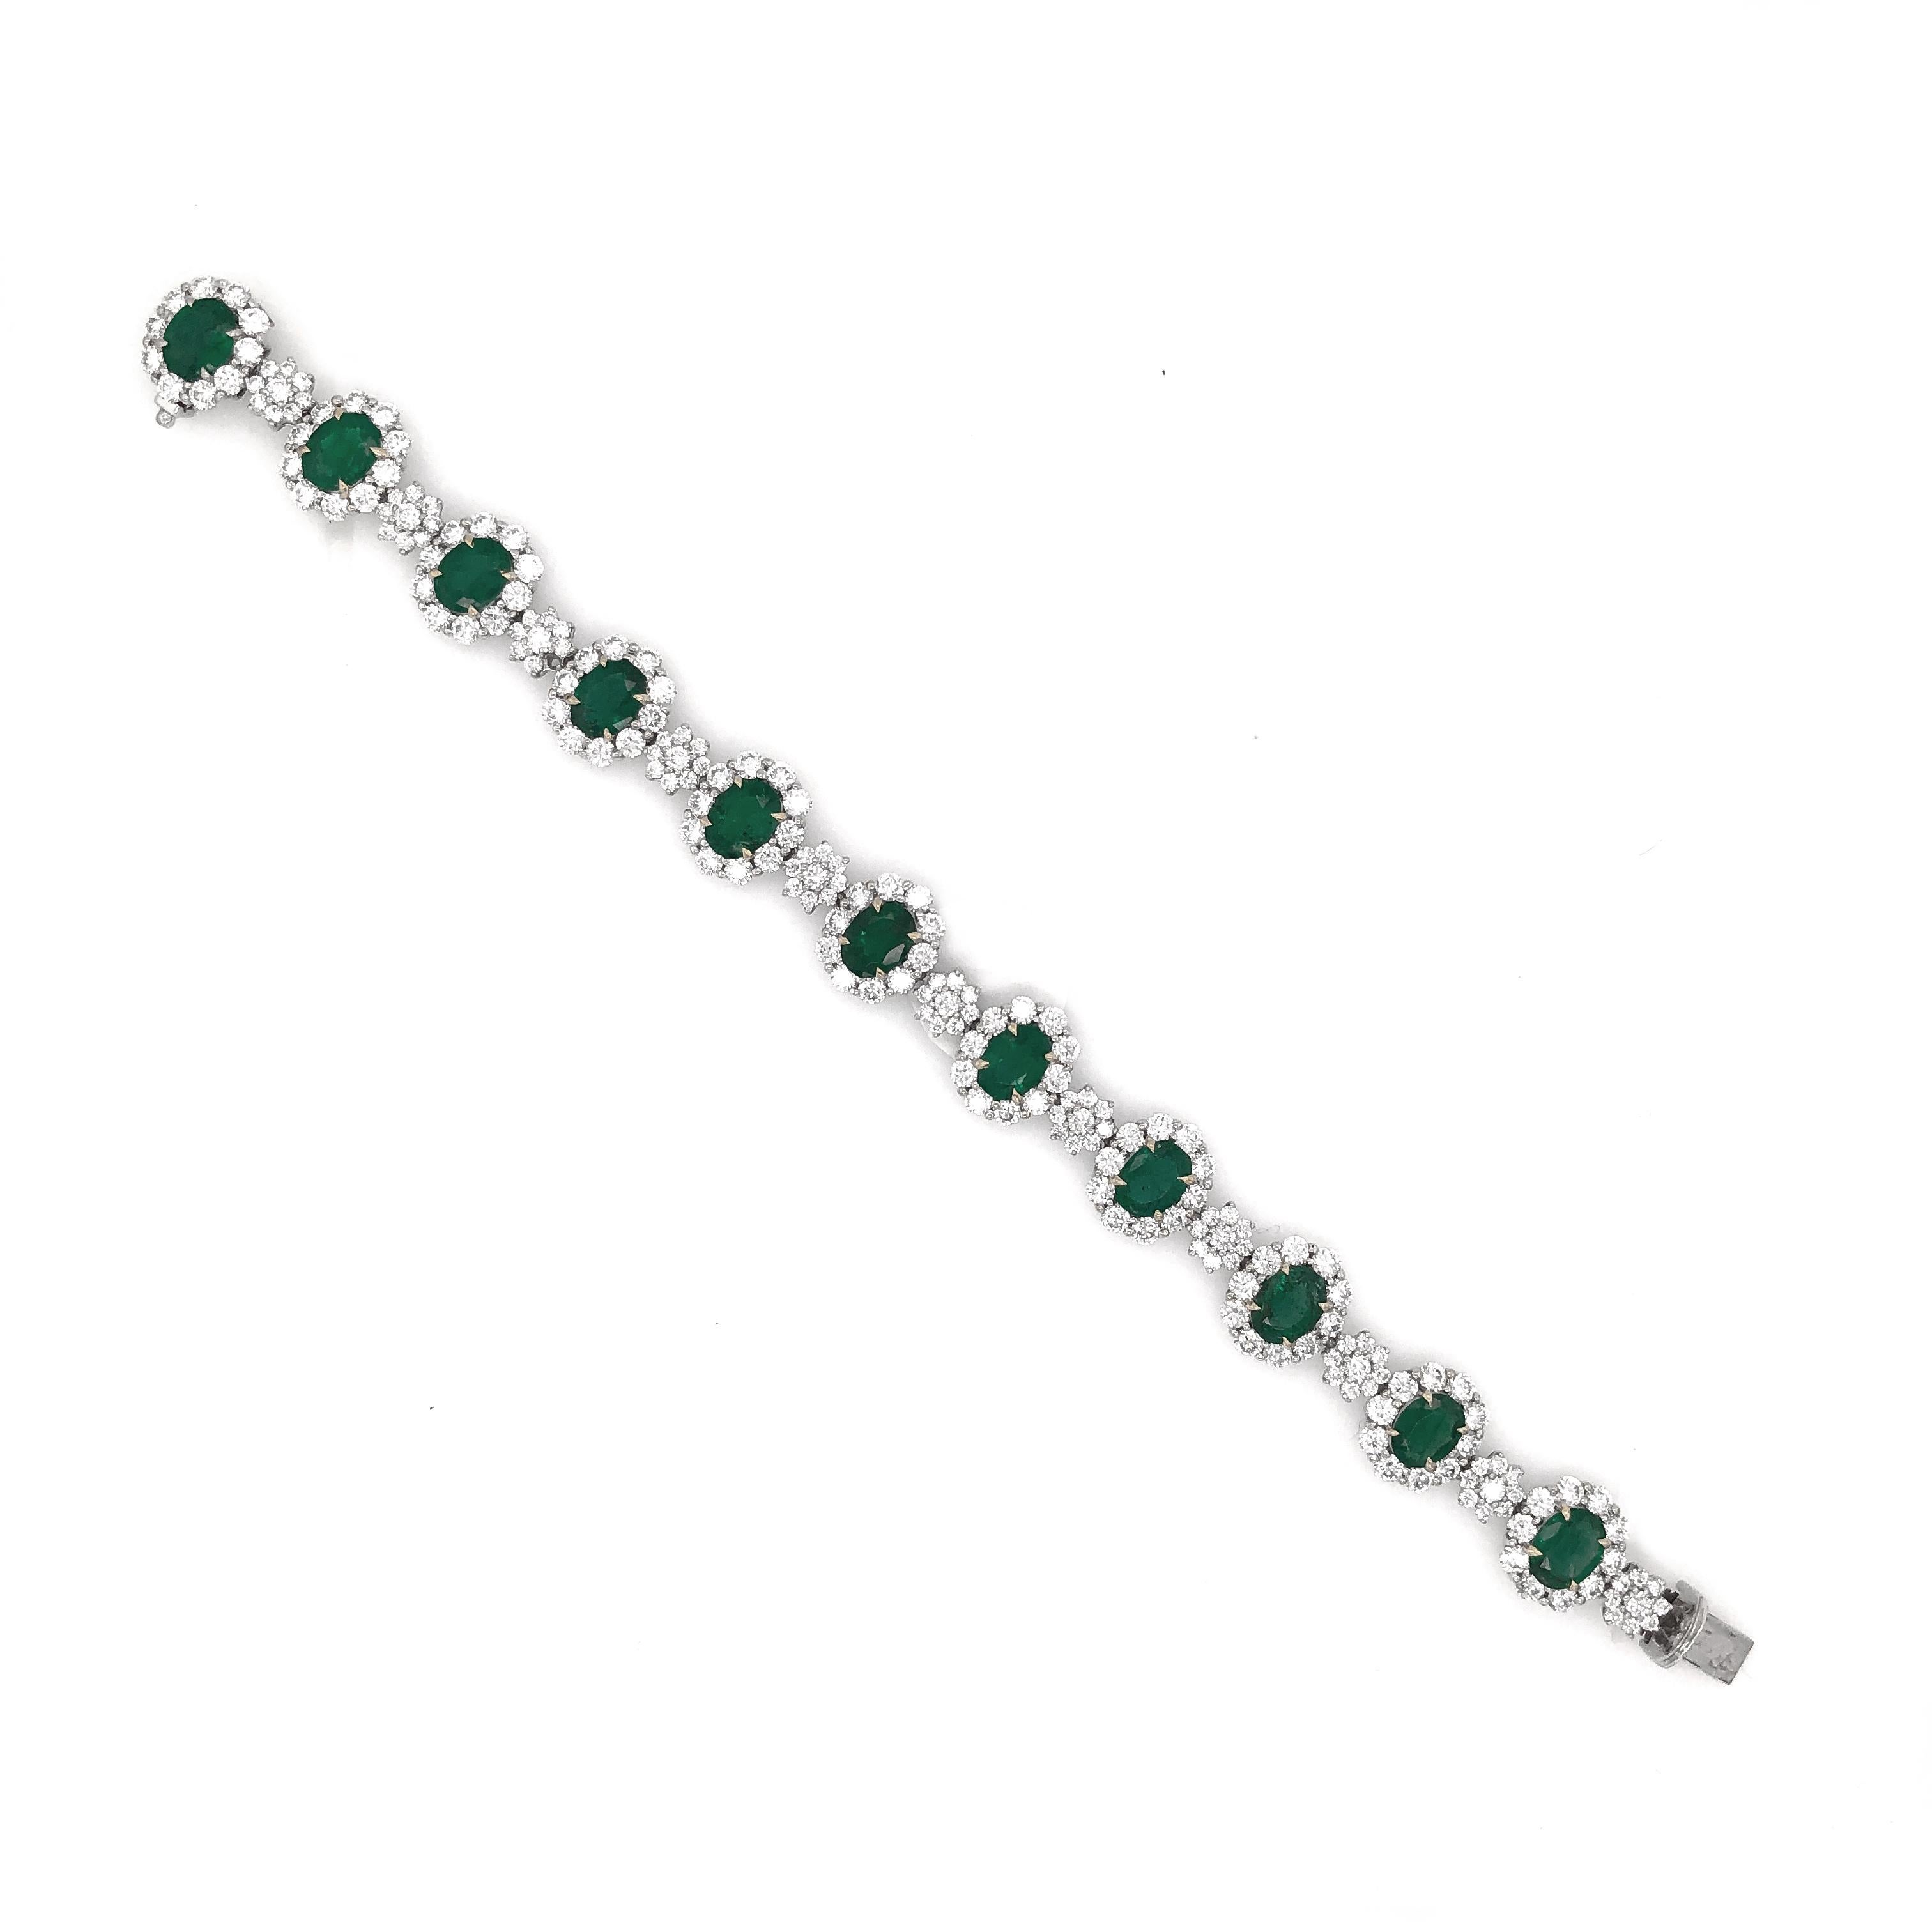 A beautiful emerald and diamond platinum bracelet. 
Stunning oval cut green emeralds 11.82 ct in total. 
Accented by white natural diamonds 10.77 ct in total. 
Diamonds are all natural in G-H Color Clarity VS. 
Platinum 950.
This a stunning,